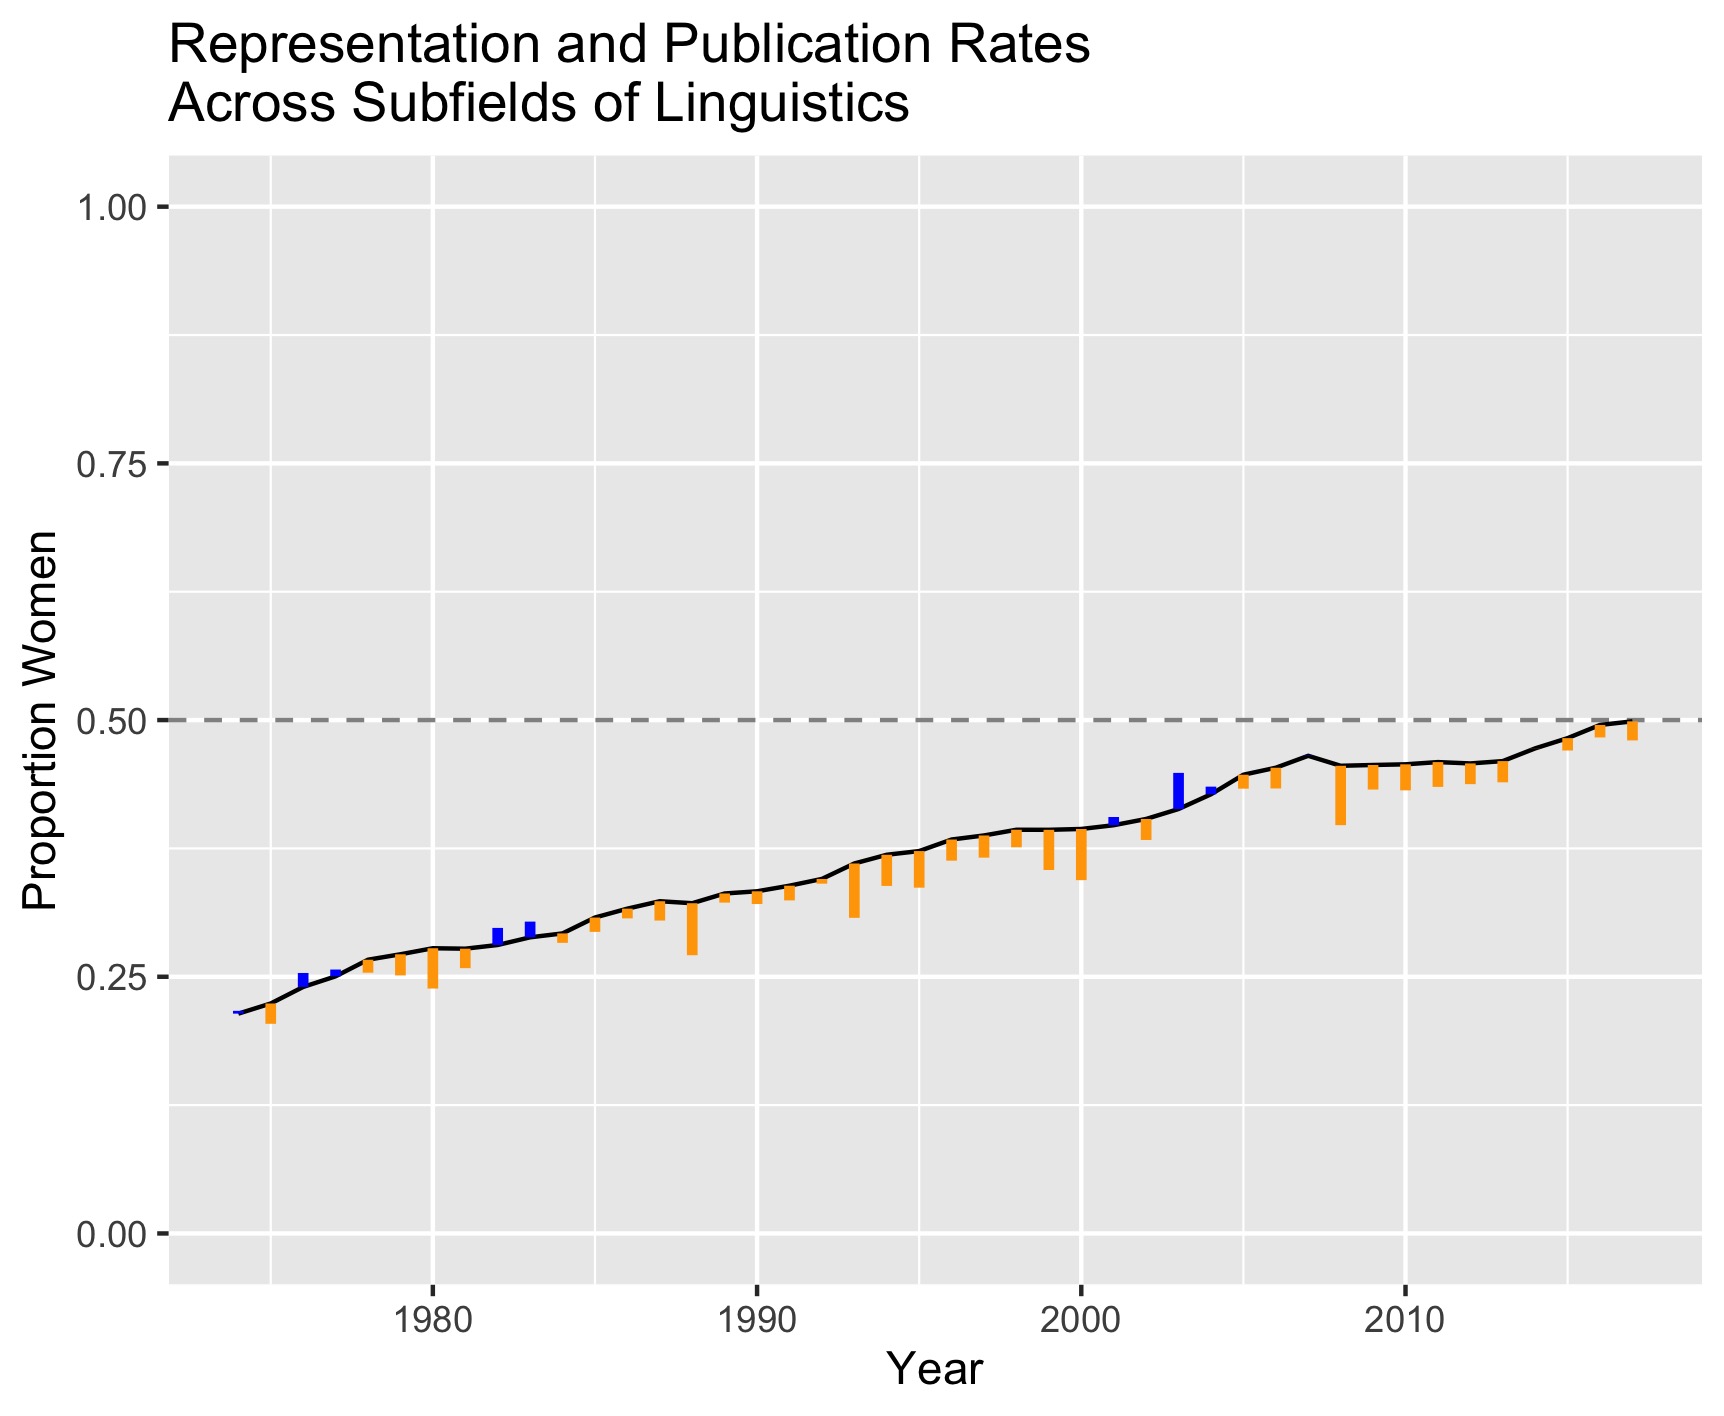 Publishing rates across time, relative to an estimate of representation in the field, across all our data